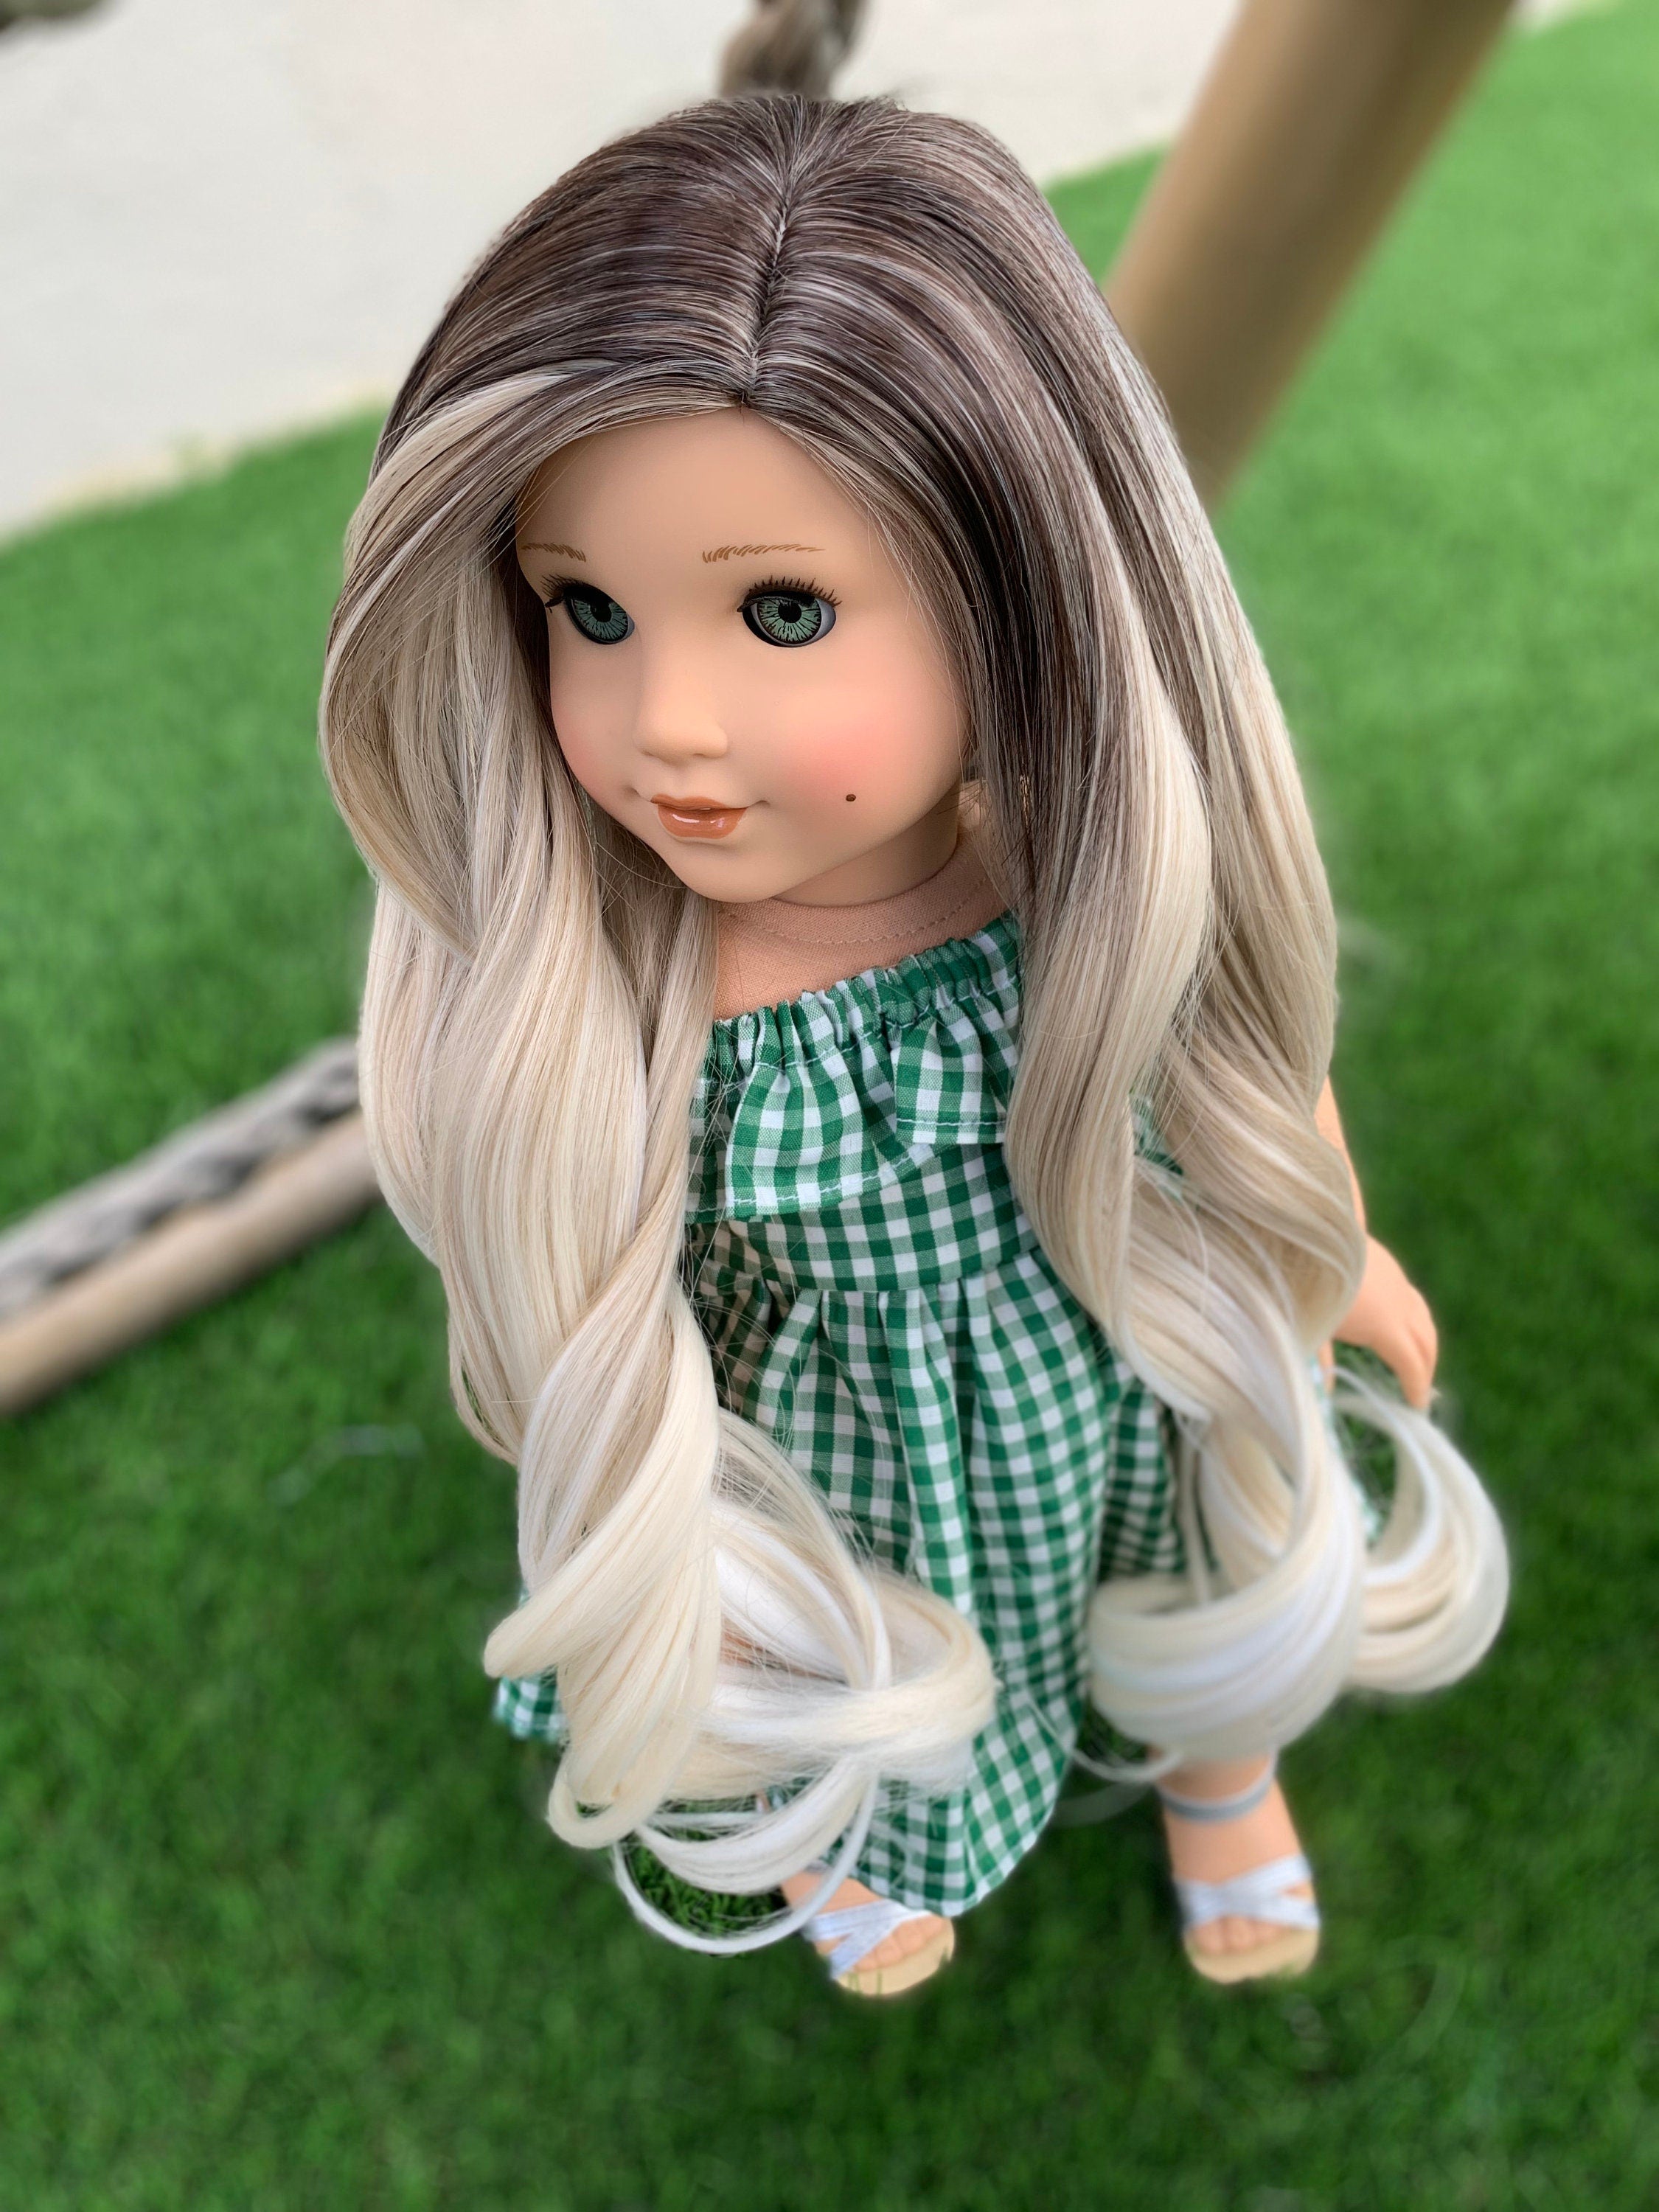 Exquisite Doll Designs Custom Doll Wigs - American Girl Size Wigs